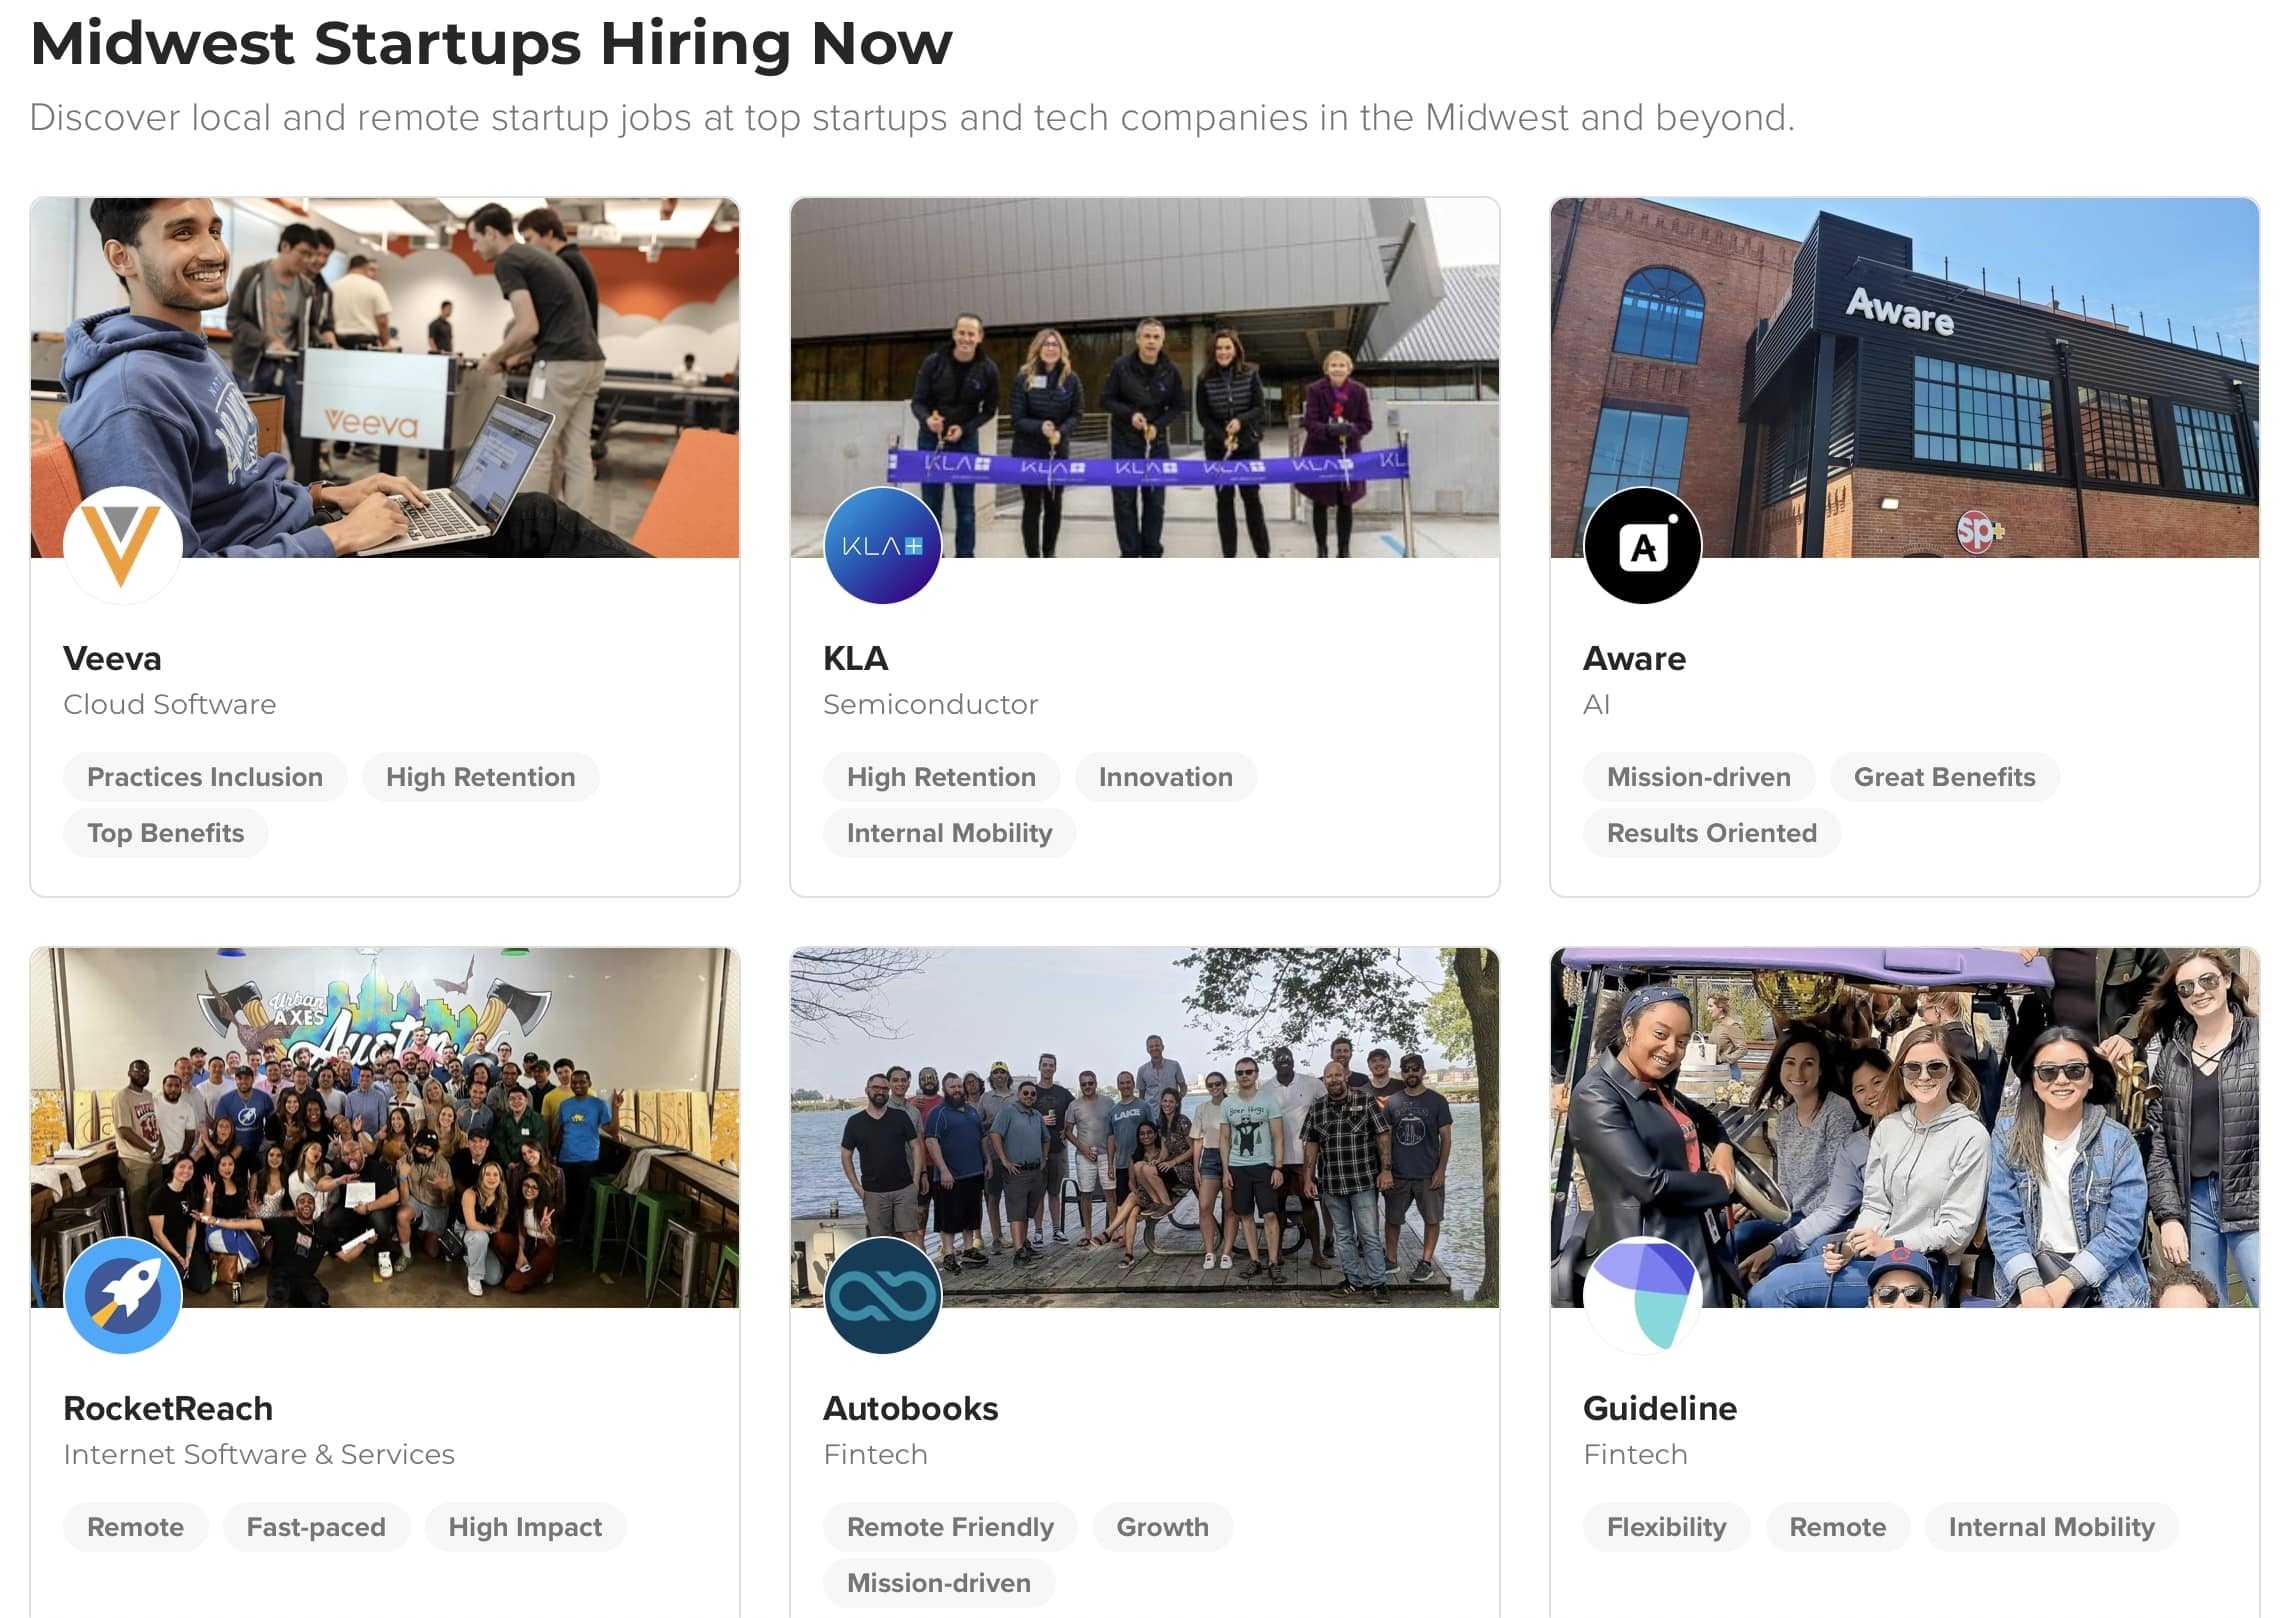 Check Out These Tech Jobs from Ann Arbor-Detroit Startups